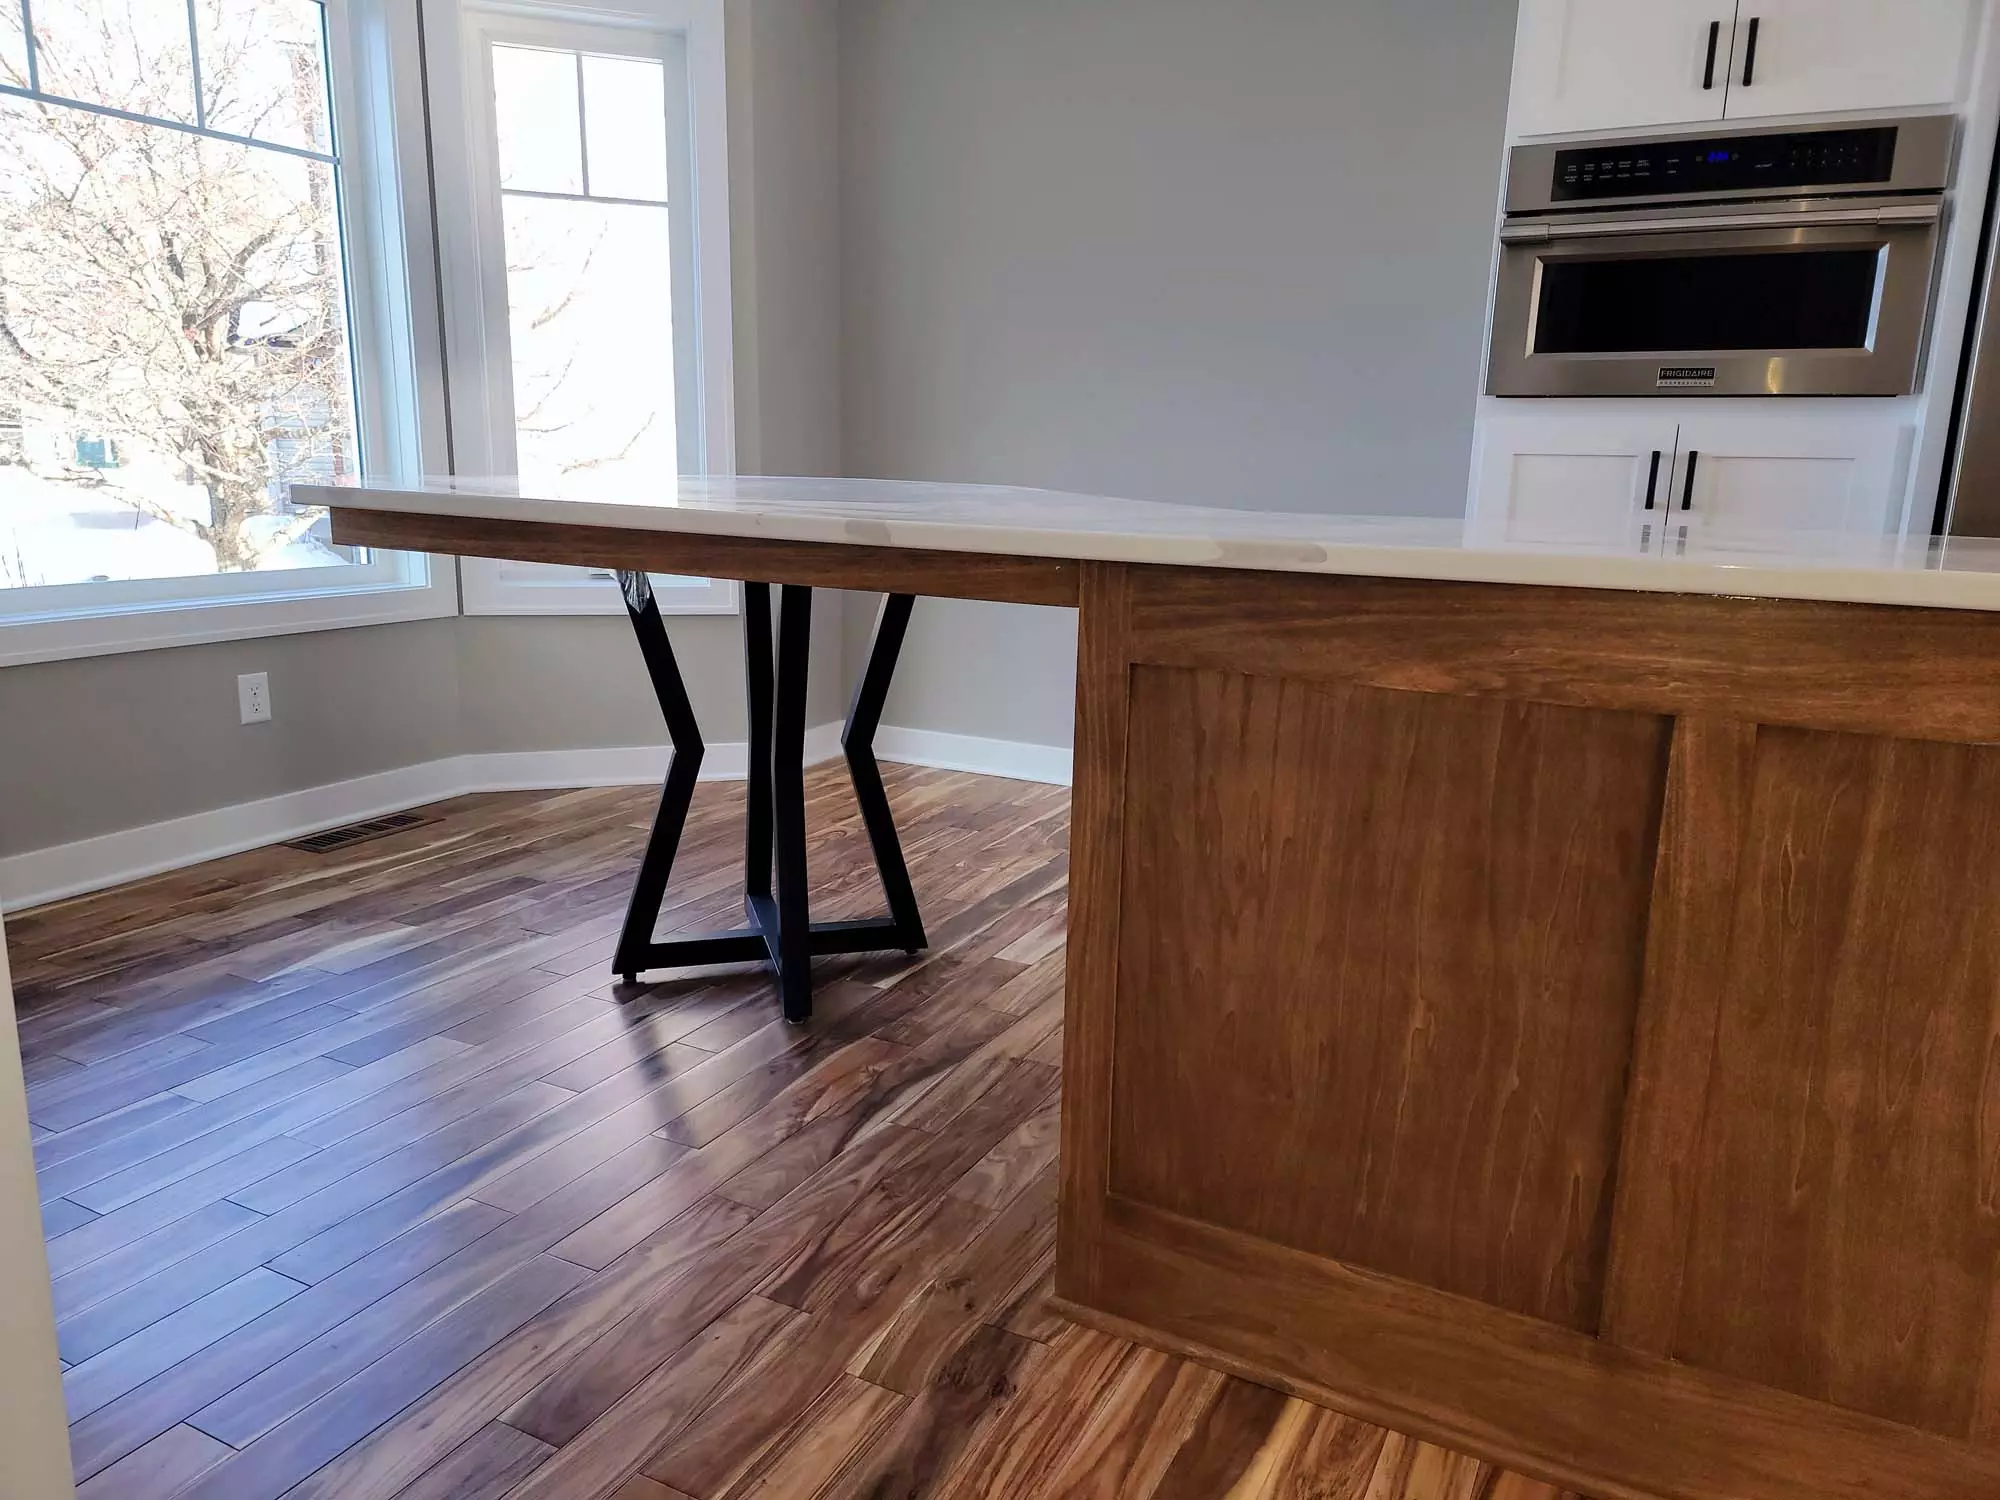 Center Island w/ built-in table top